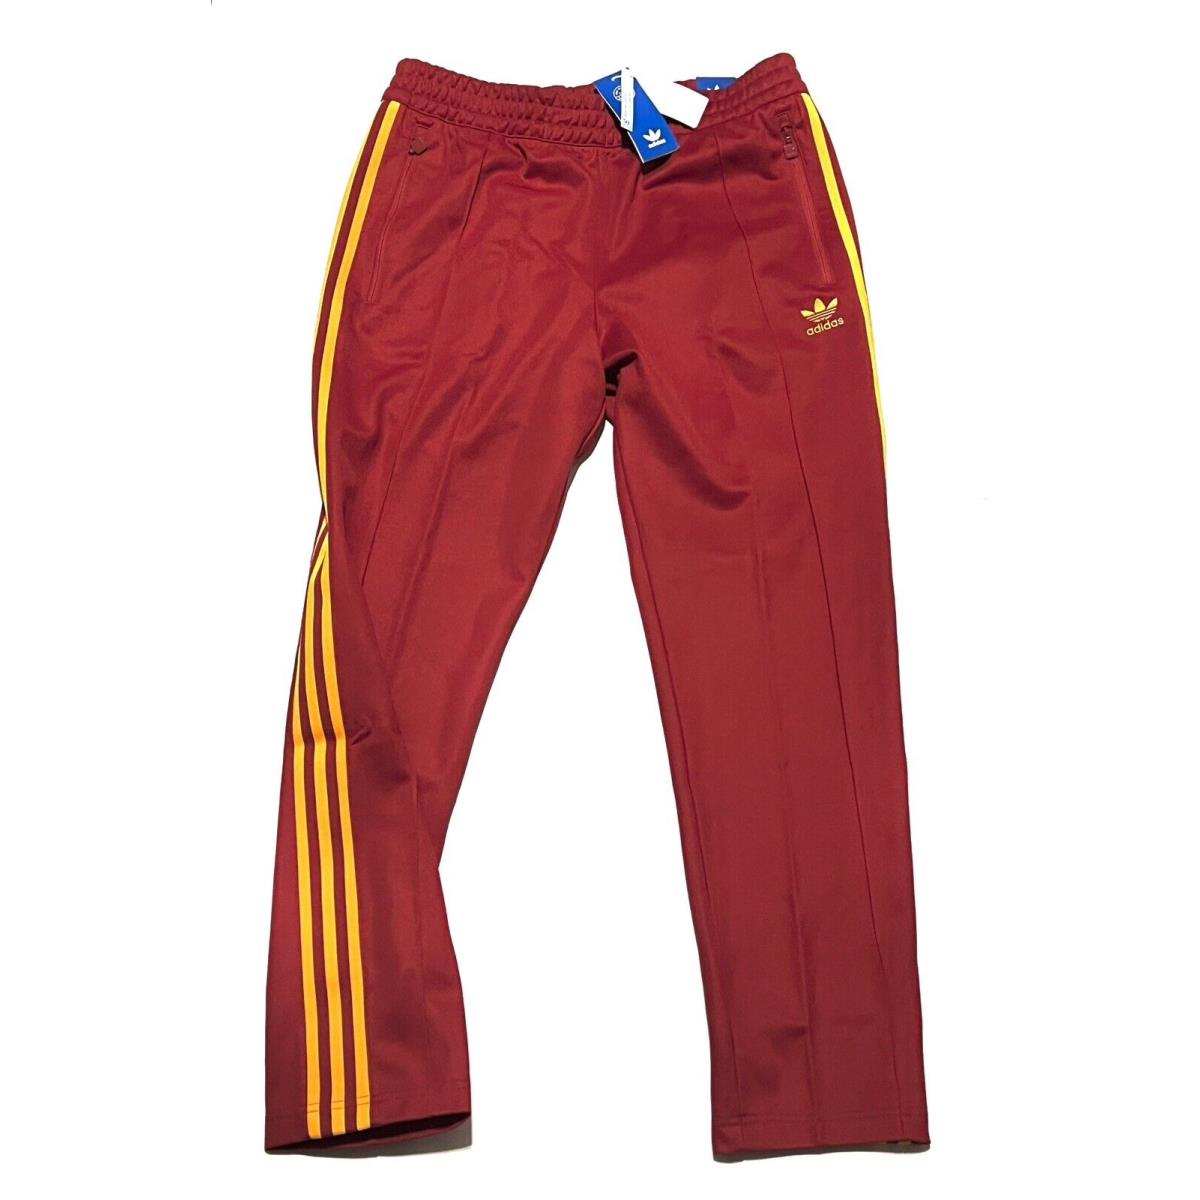 Adidas HK7401 Beckenbauer Track Pants Team Power Red Slim Tapered S Small